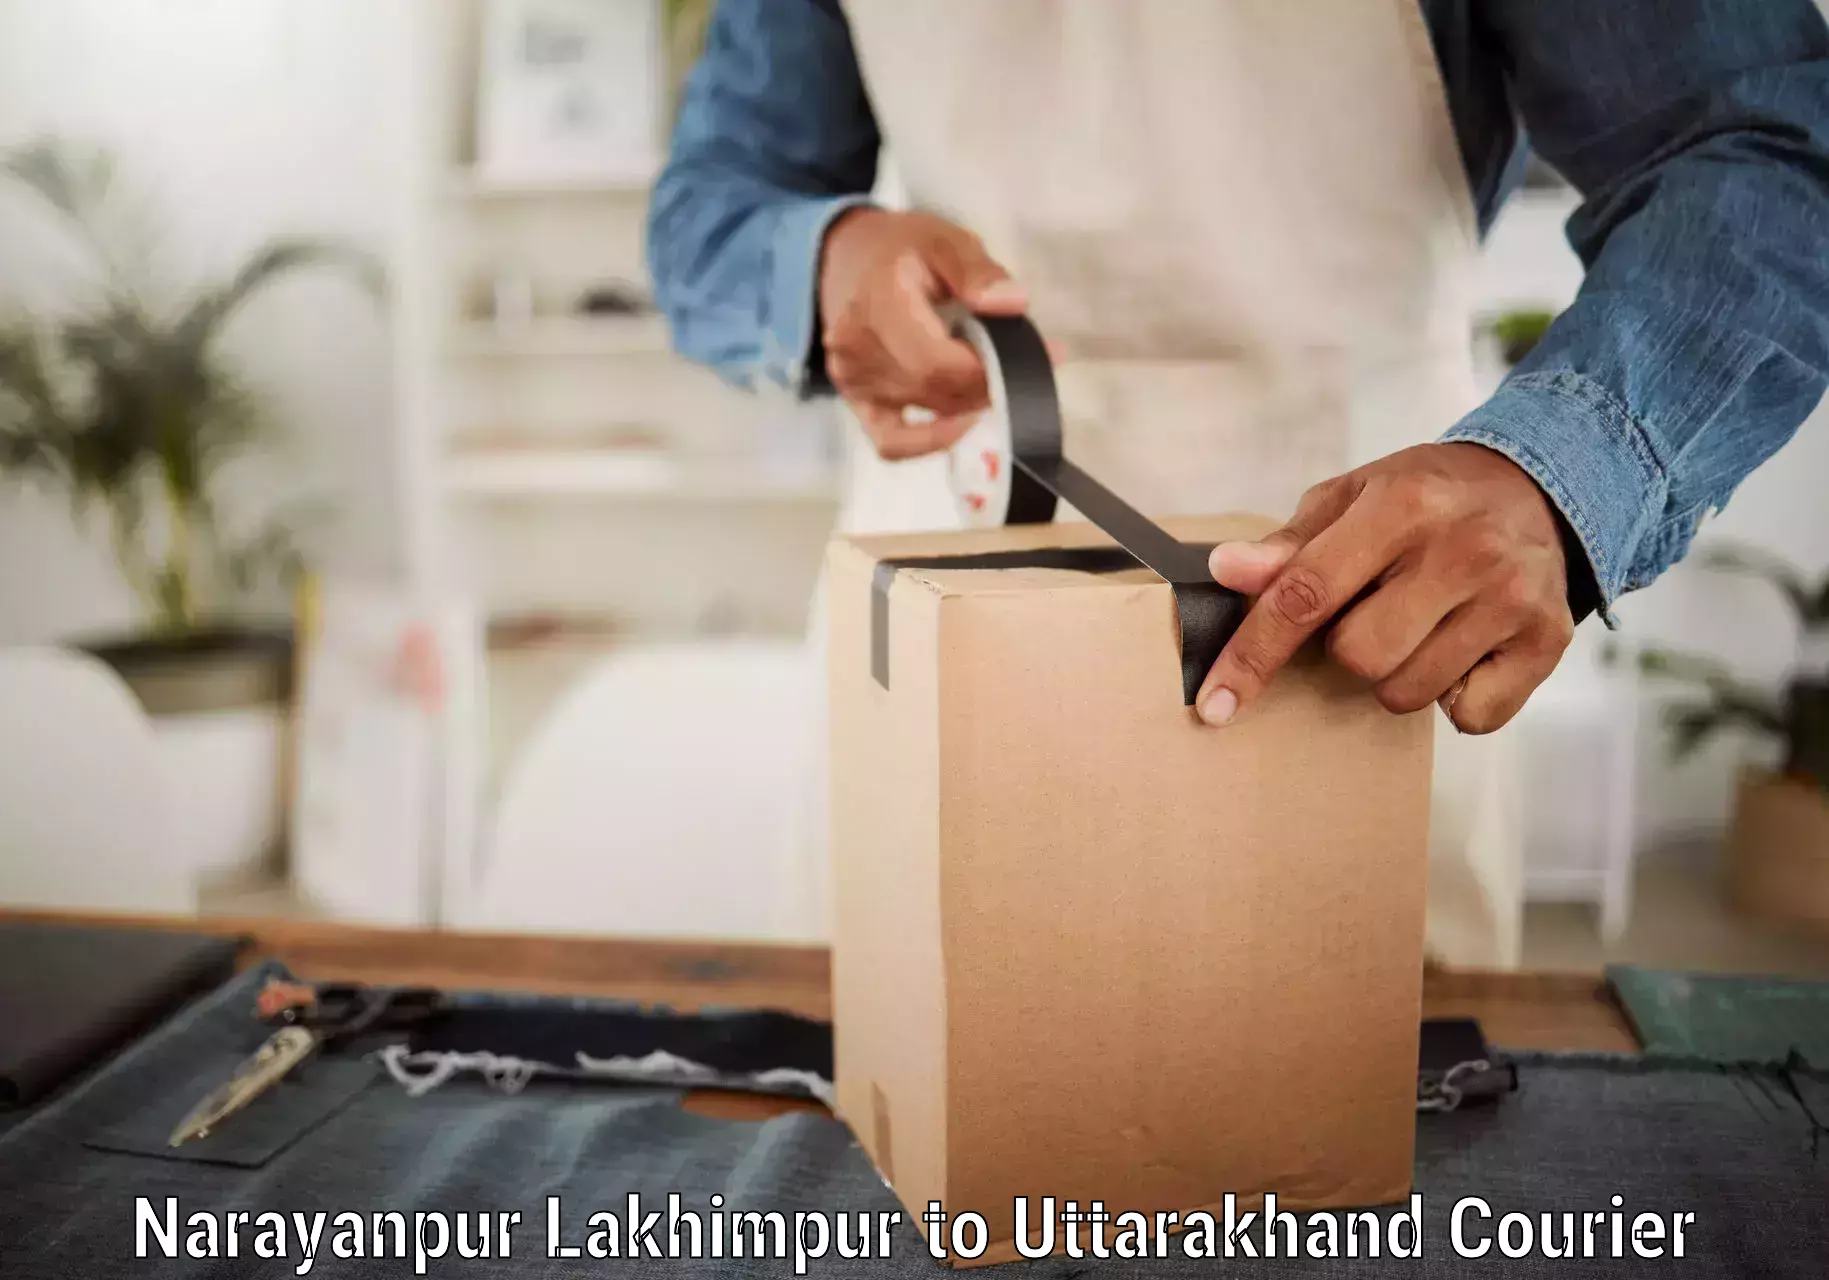 Automated parcel services Narayanpur Lakhimpur to Champawat